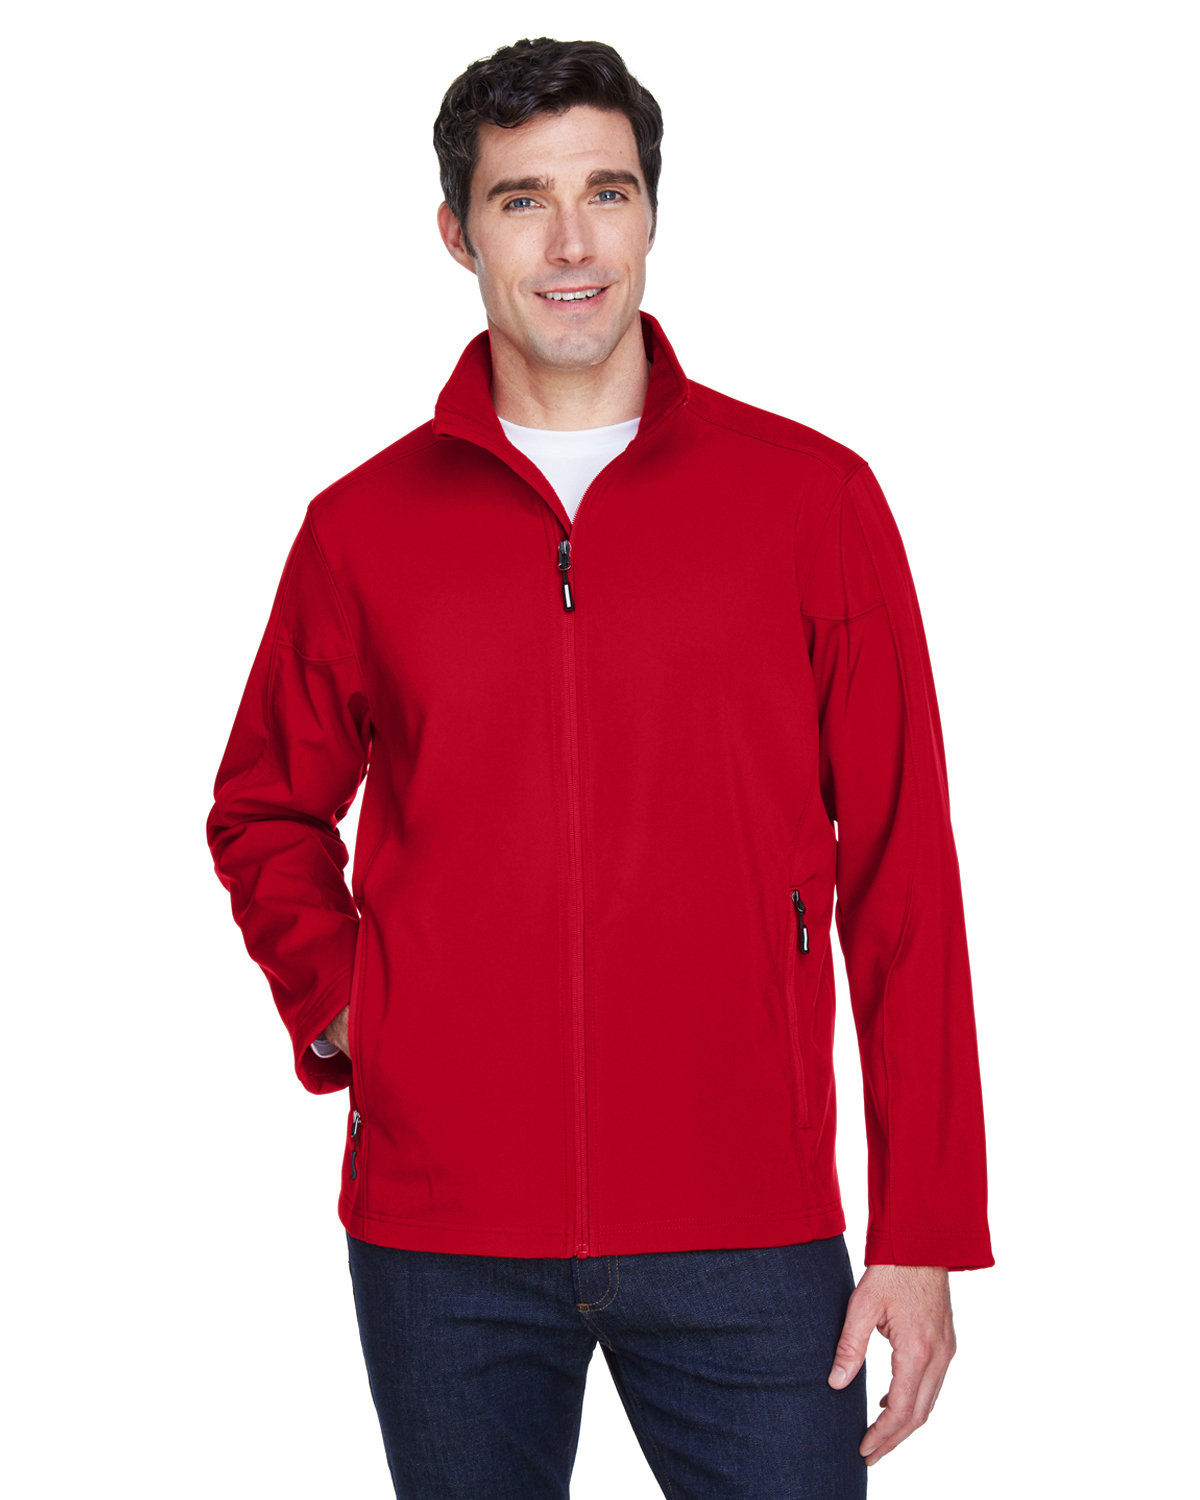 Core 365 Men's Cruise Two-Layer Fleece Bonded Soft Shell Jacket CLASSIC RED 